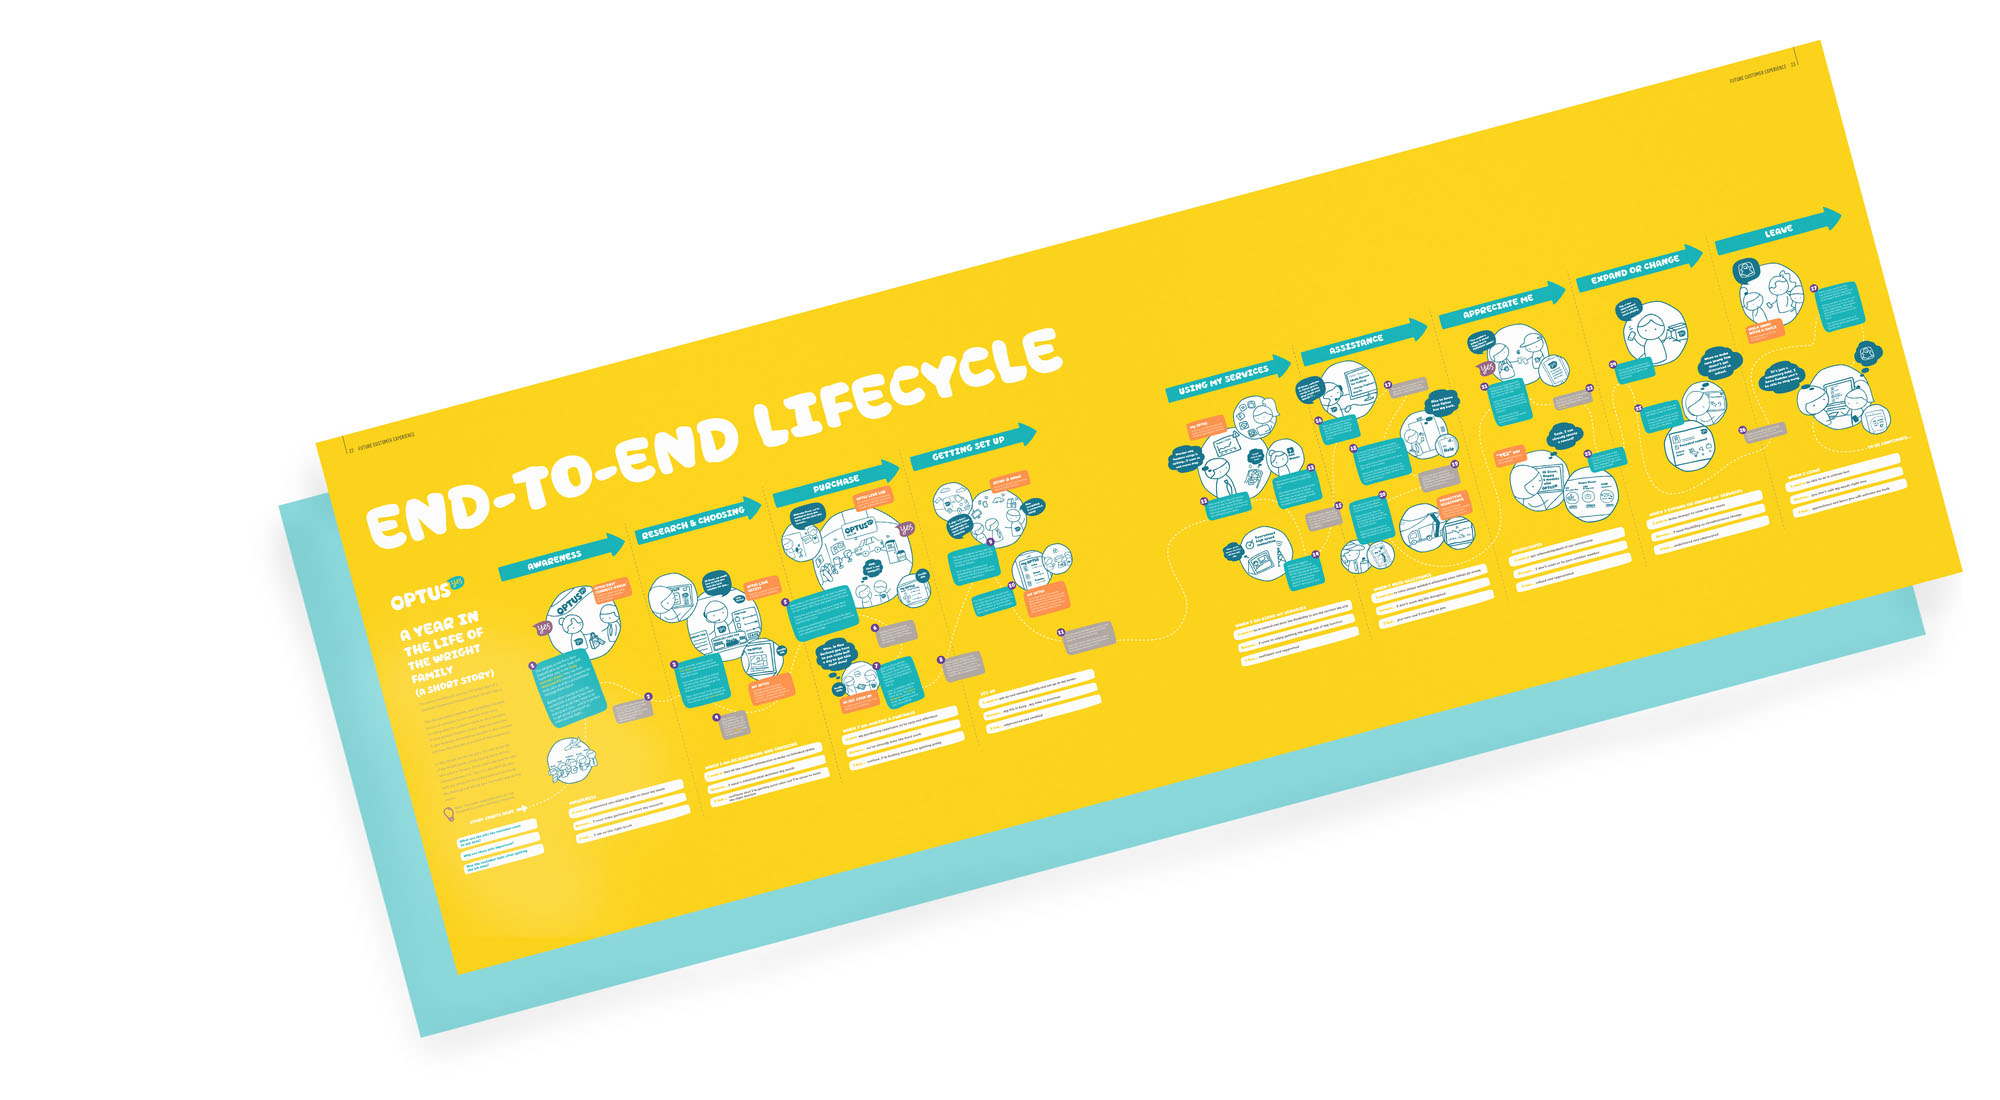 Optus end-to-end lifecycle customer journey map